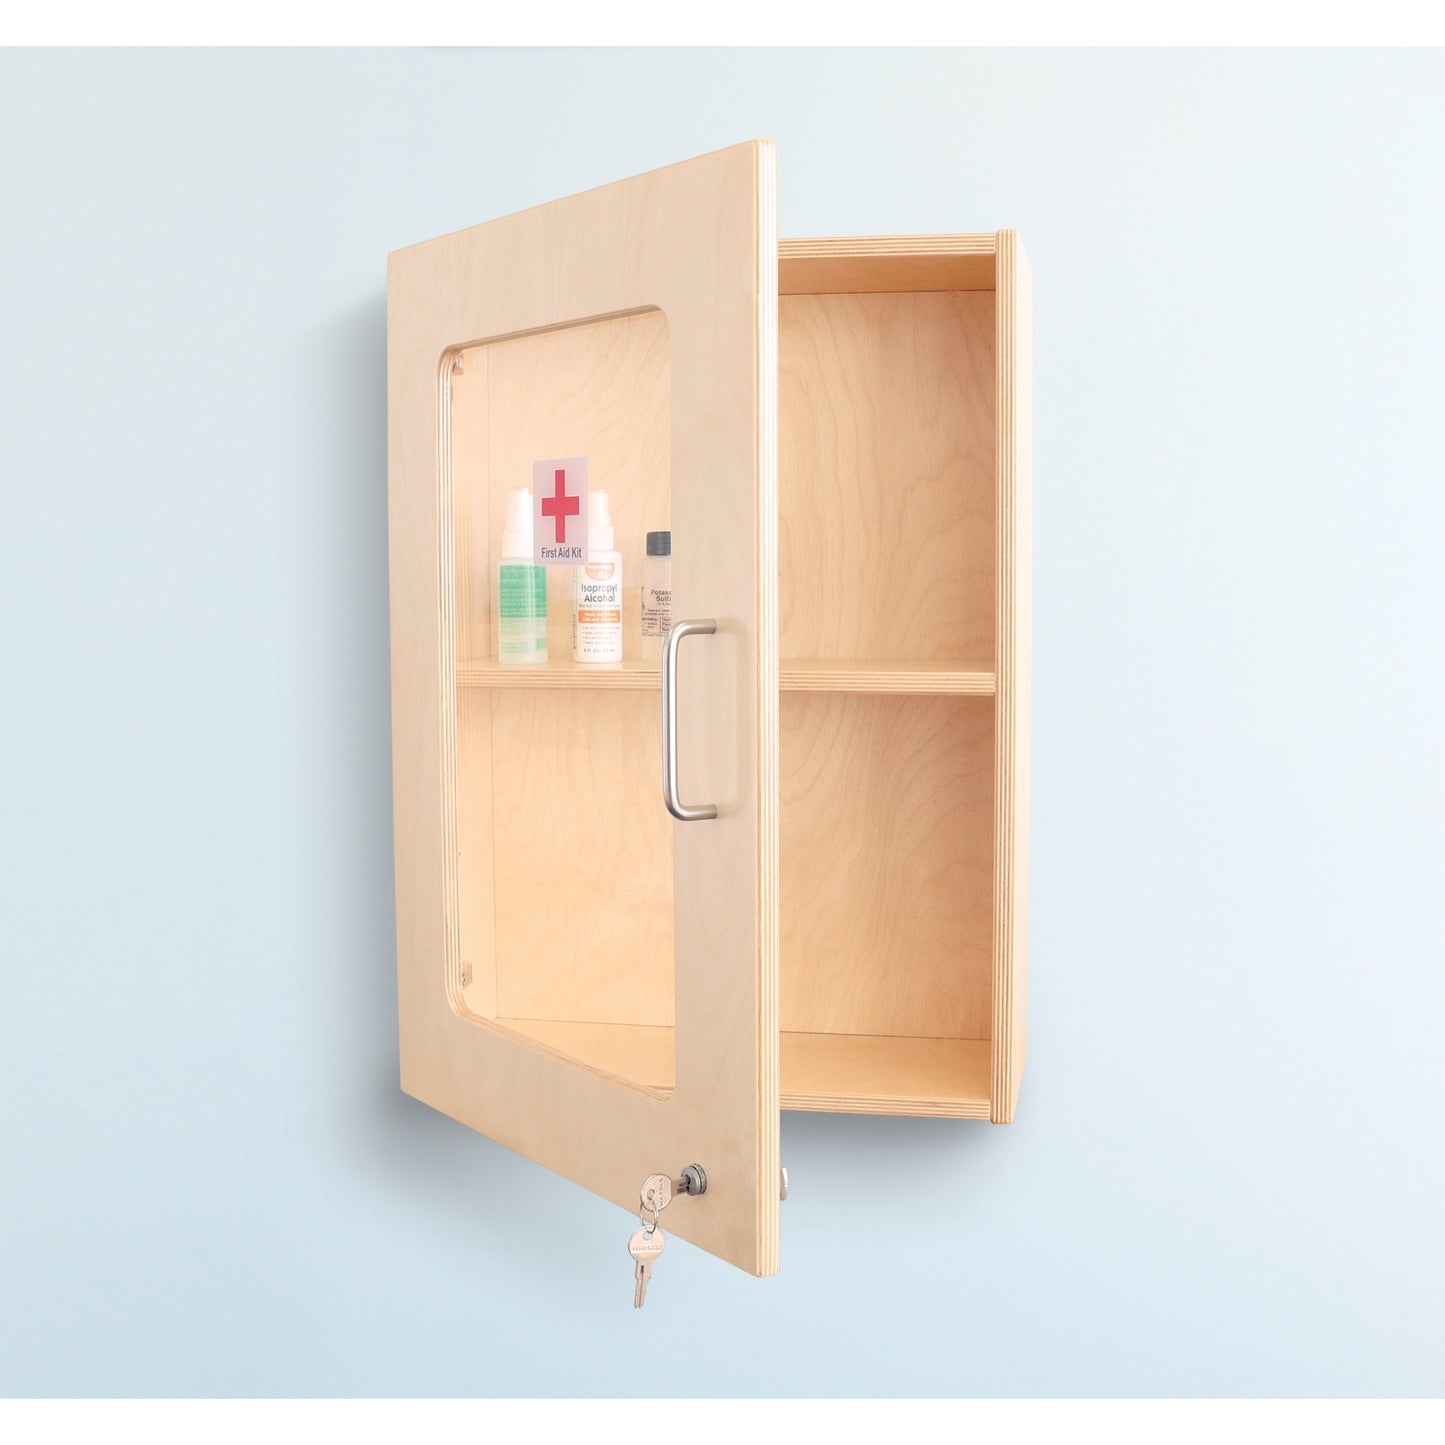 Medicine/First Aid Wall Mounted Cabinet